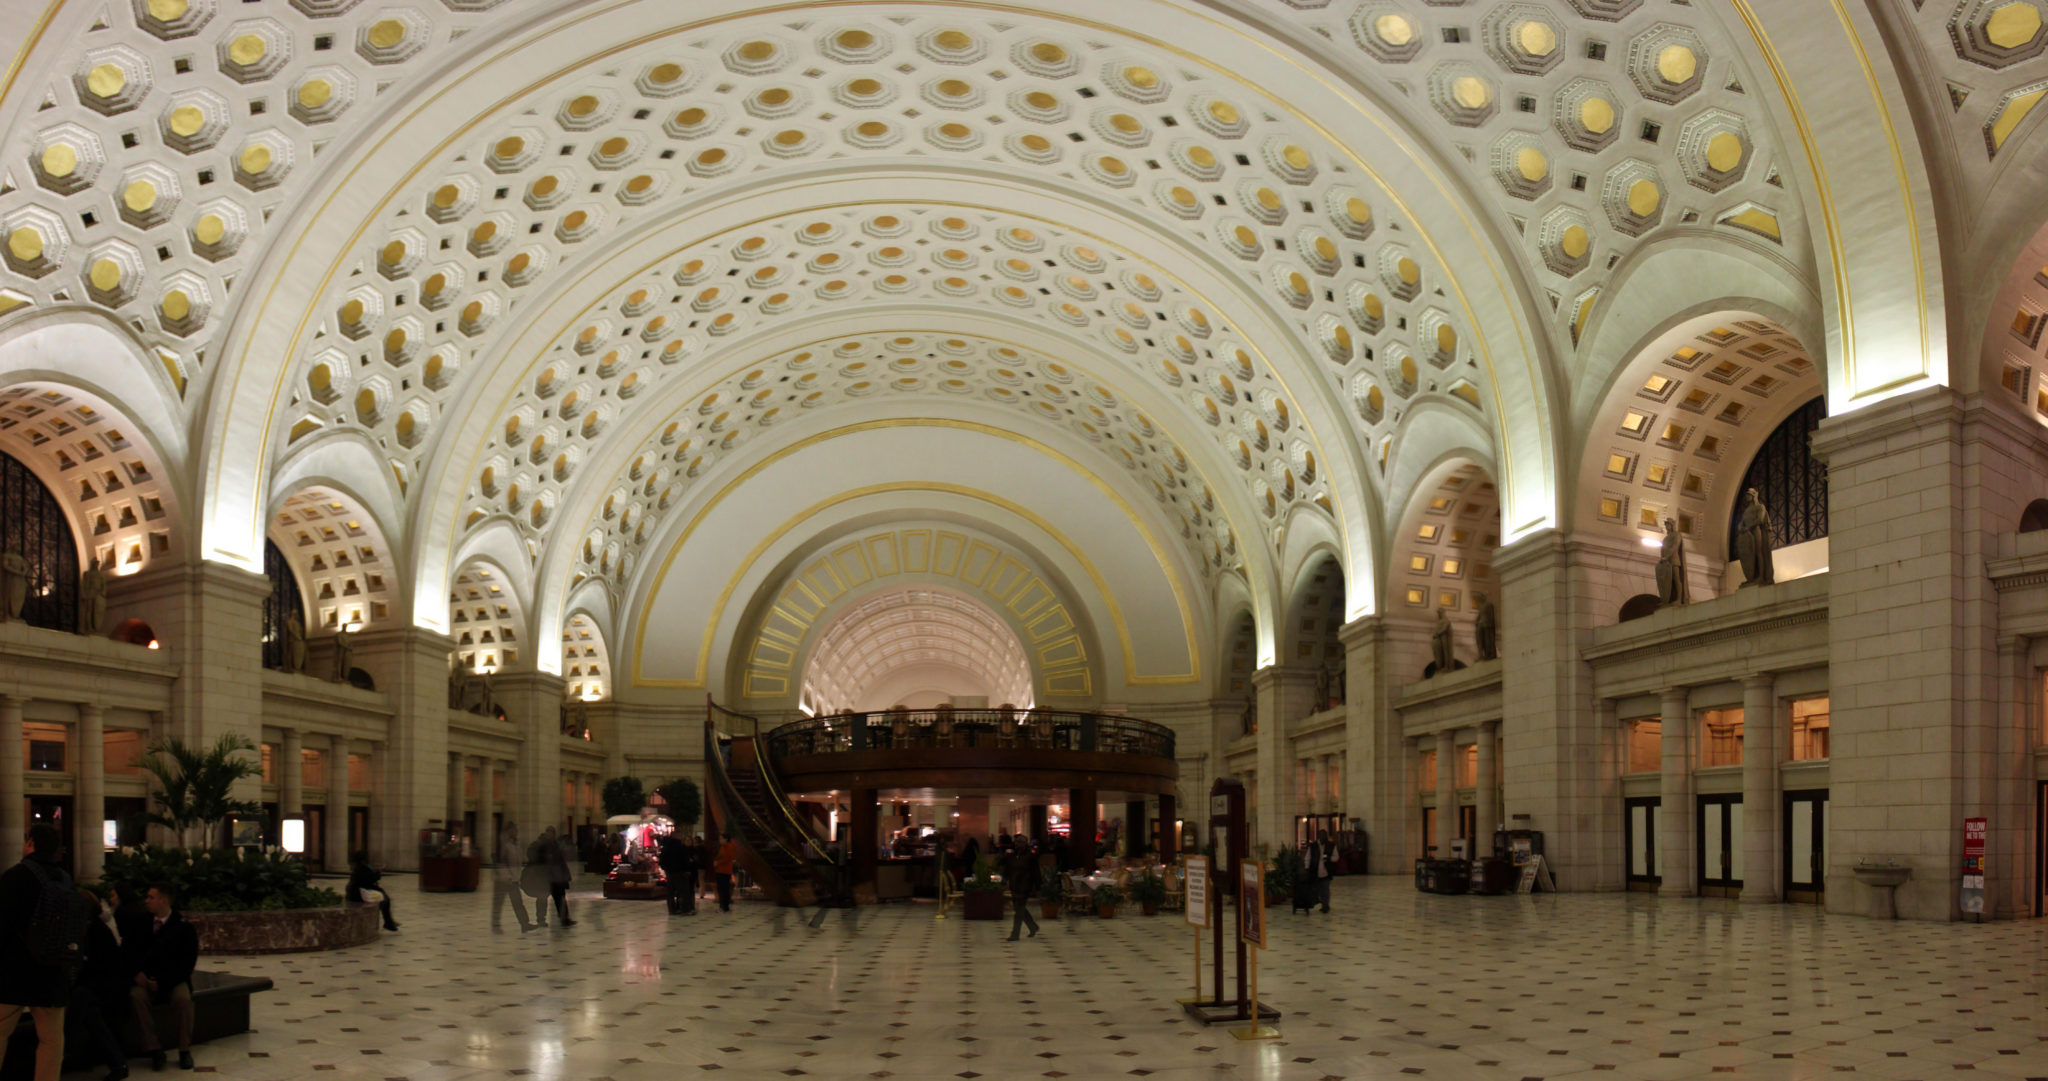 Amtrak receives Union Station grant from FRA